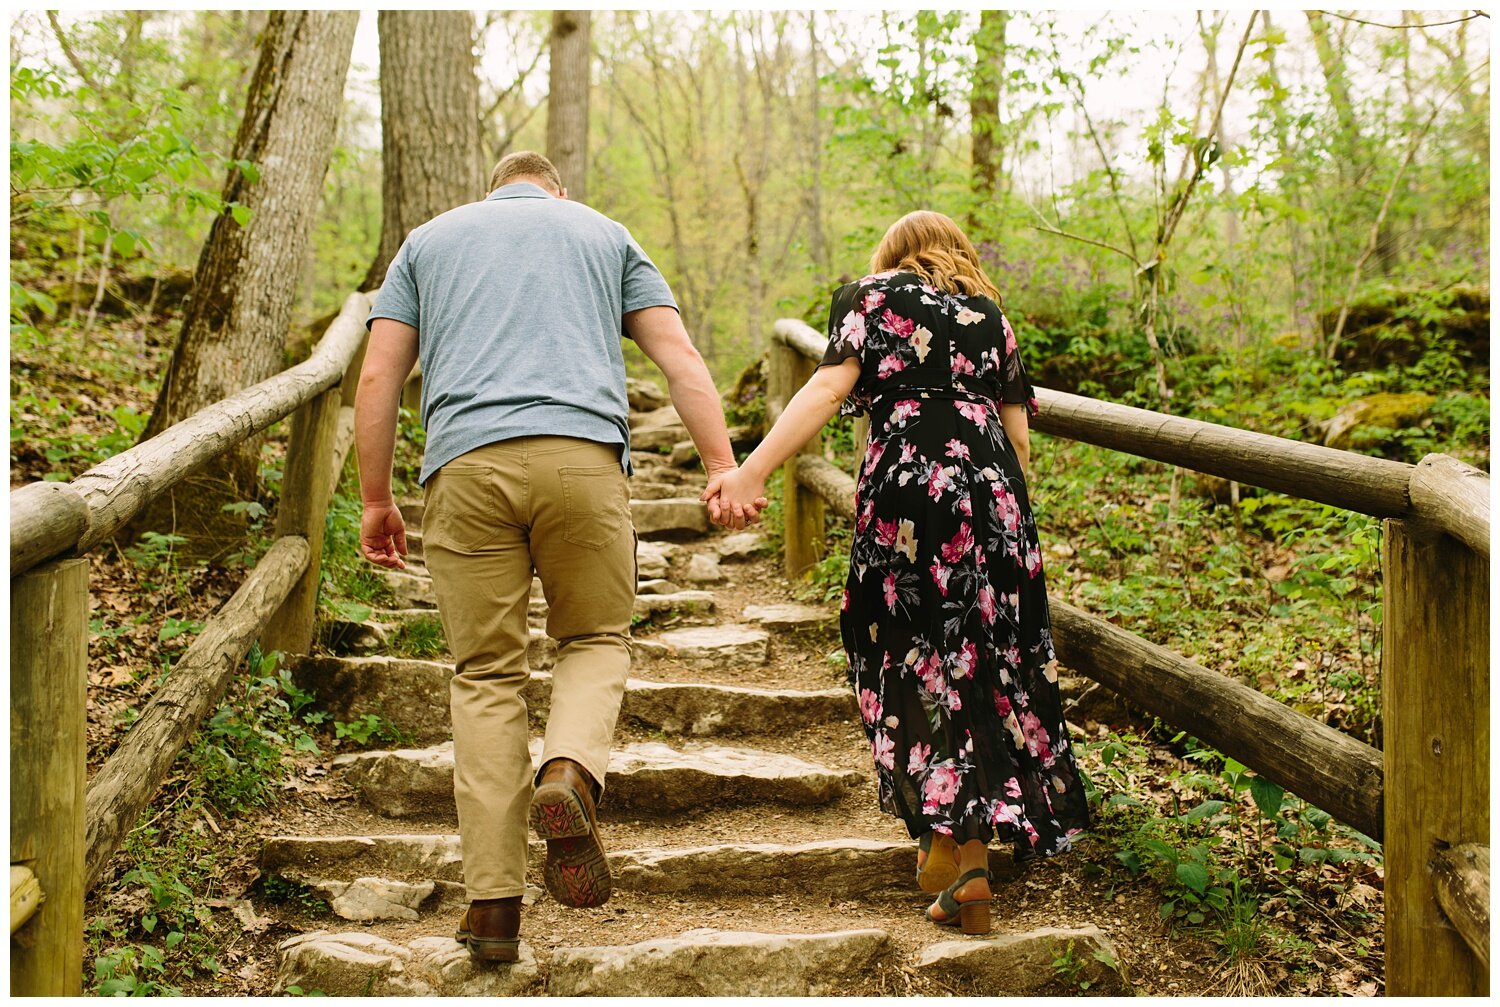 Kendra_Farris_Photography_Red_River_Gorge_Engagement_Photos-1.jpg